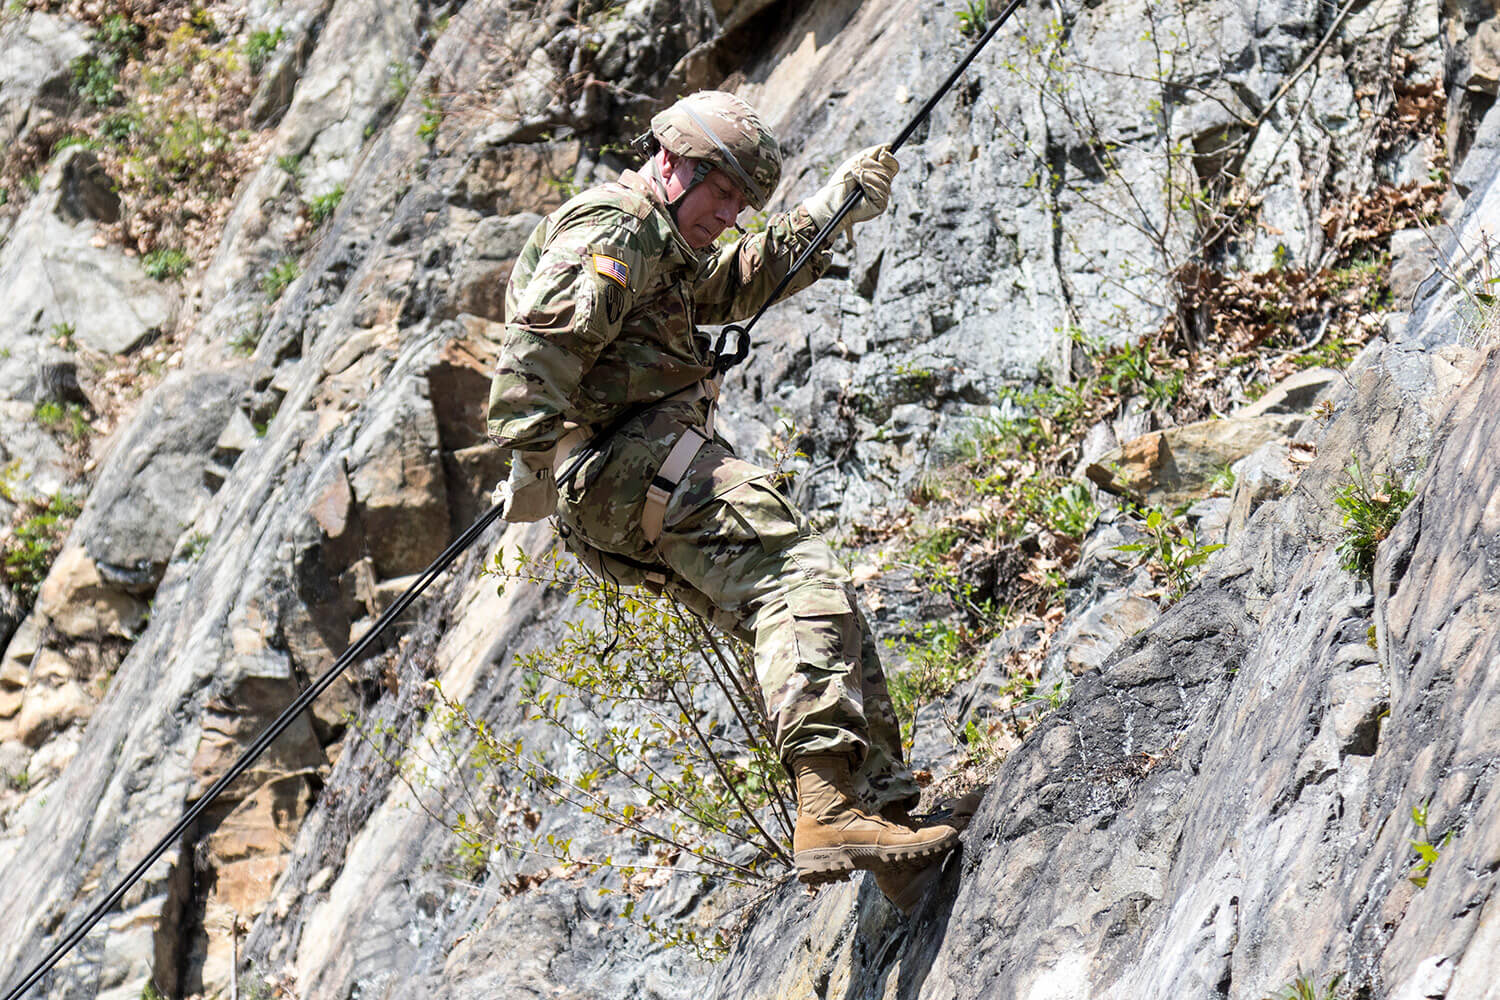 CW2 David Morton, range operations manager at Camp Smith, assigned to the 42nd Infantry Division, New York Army National Guard, navigates the terrain of a mountainside using one of the newly updated rappel lanes at Camp Smith Training Site in Cortlandt Manor, N.Y. New York Army National Guard photo by SSG Michael Davis